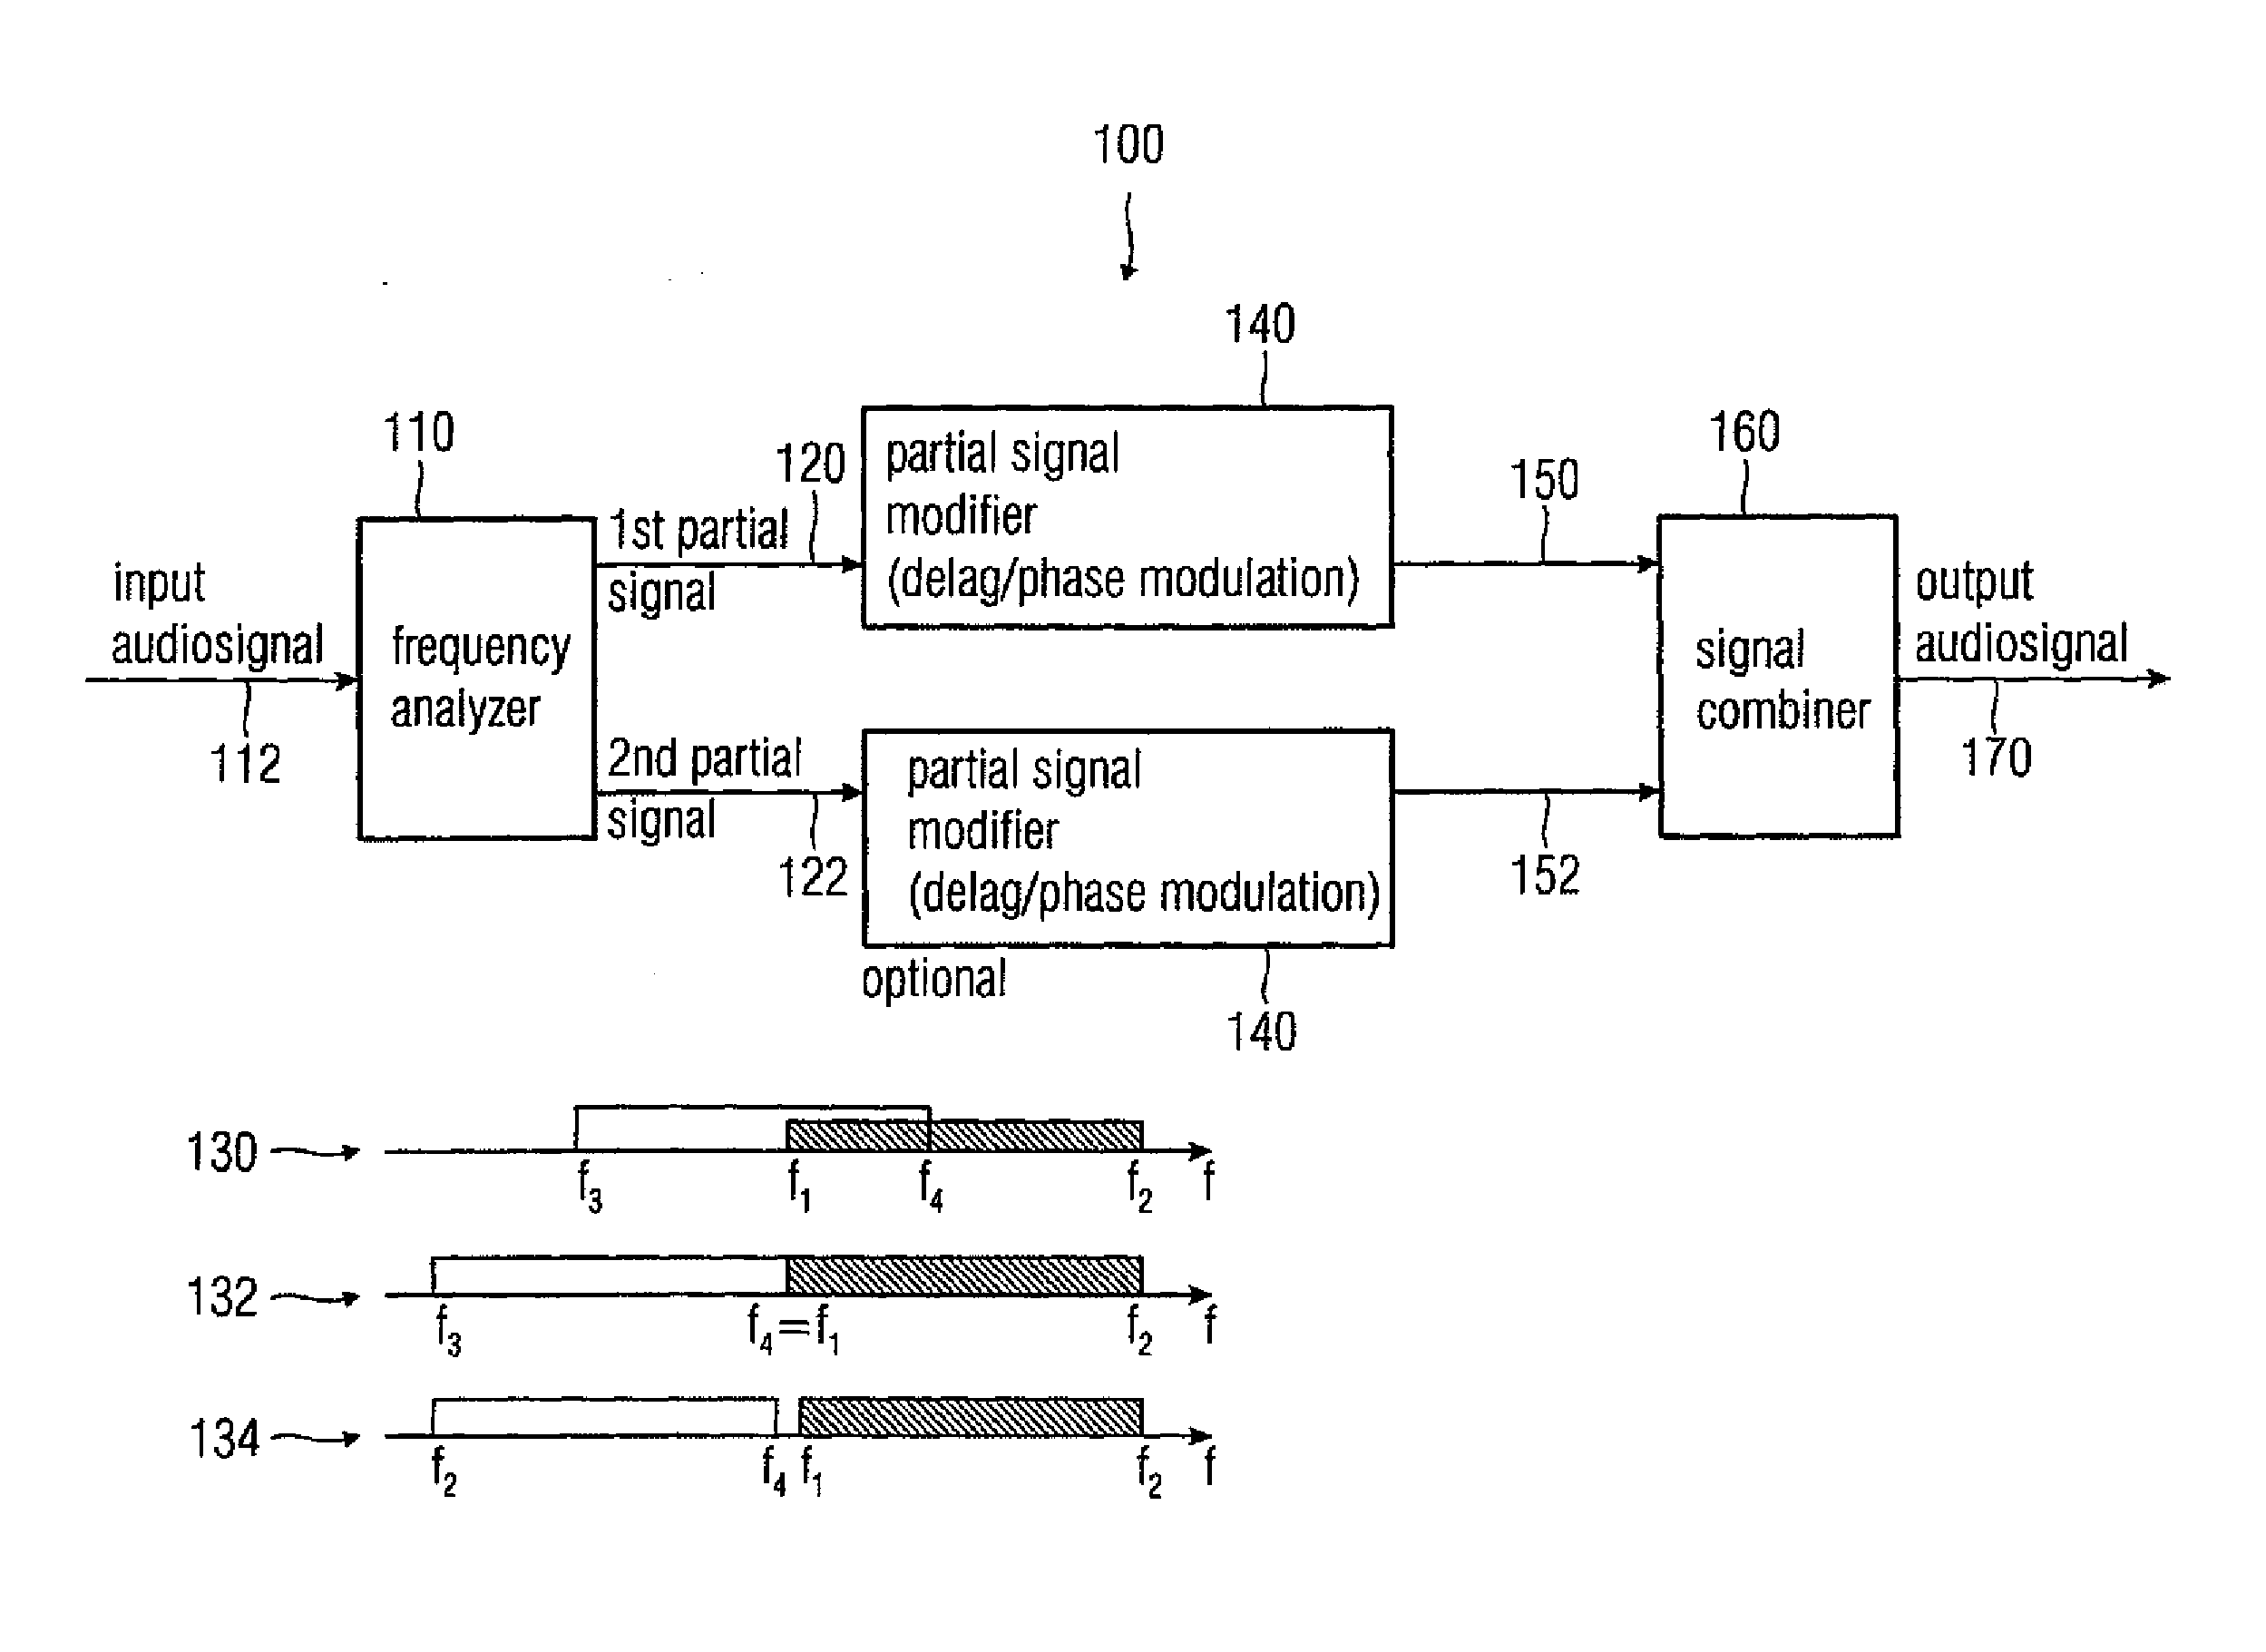 Audio signal decorrelator, multi channel audio signal processor, audio signal processor, method for deriving an output audio signal from an input audio signal and computer program